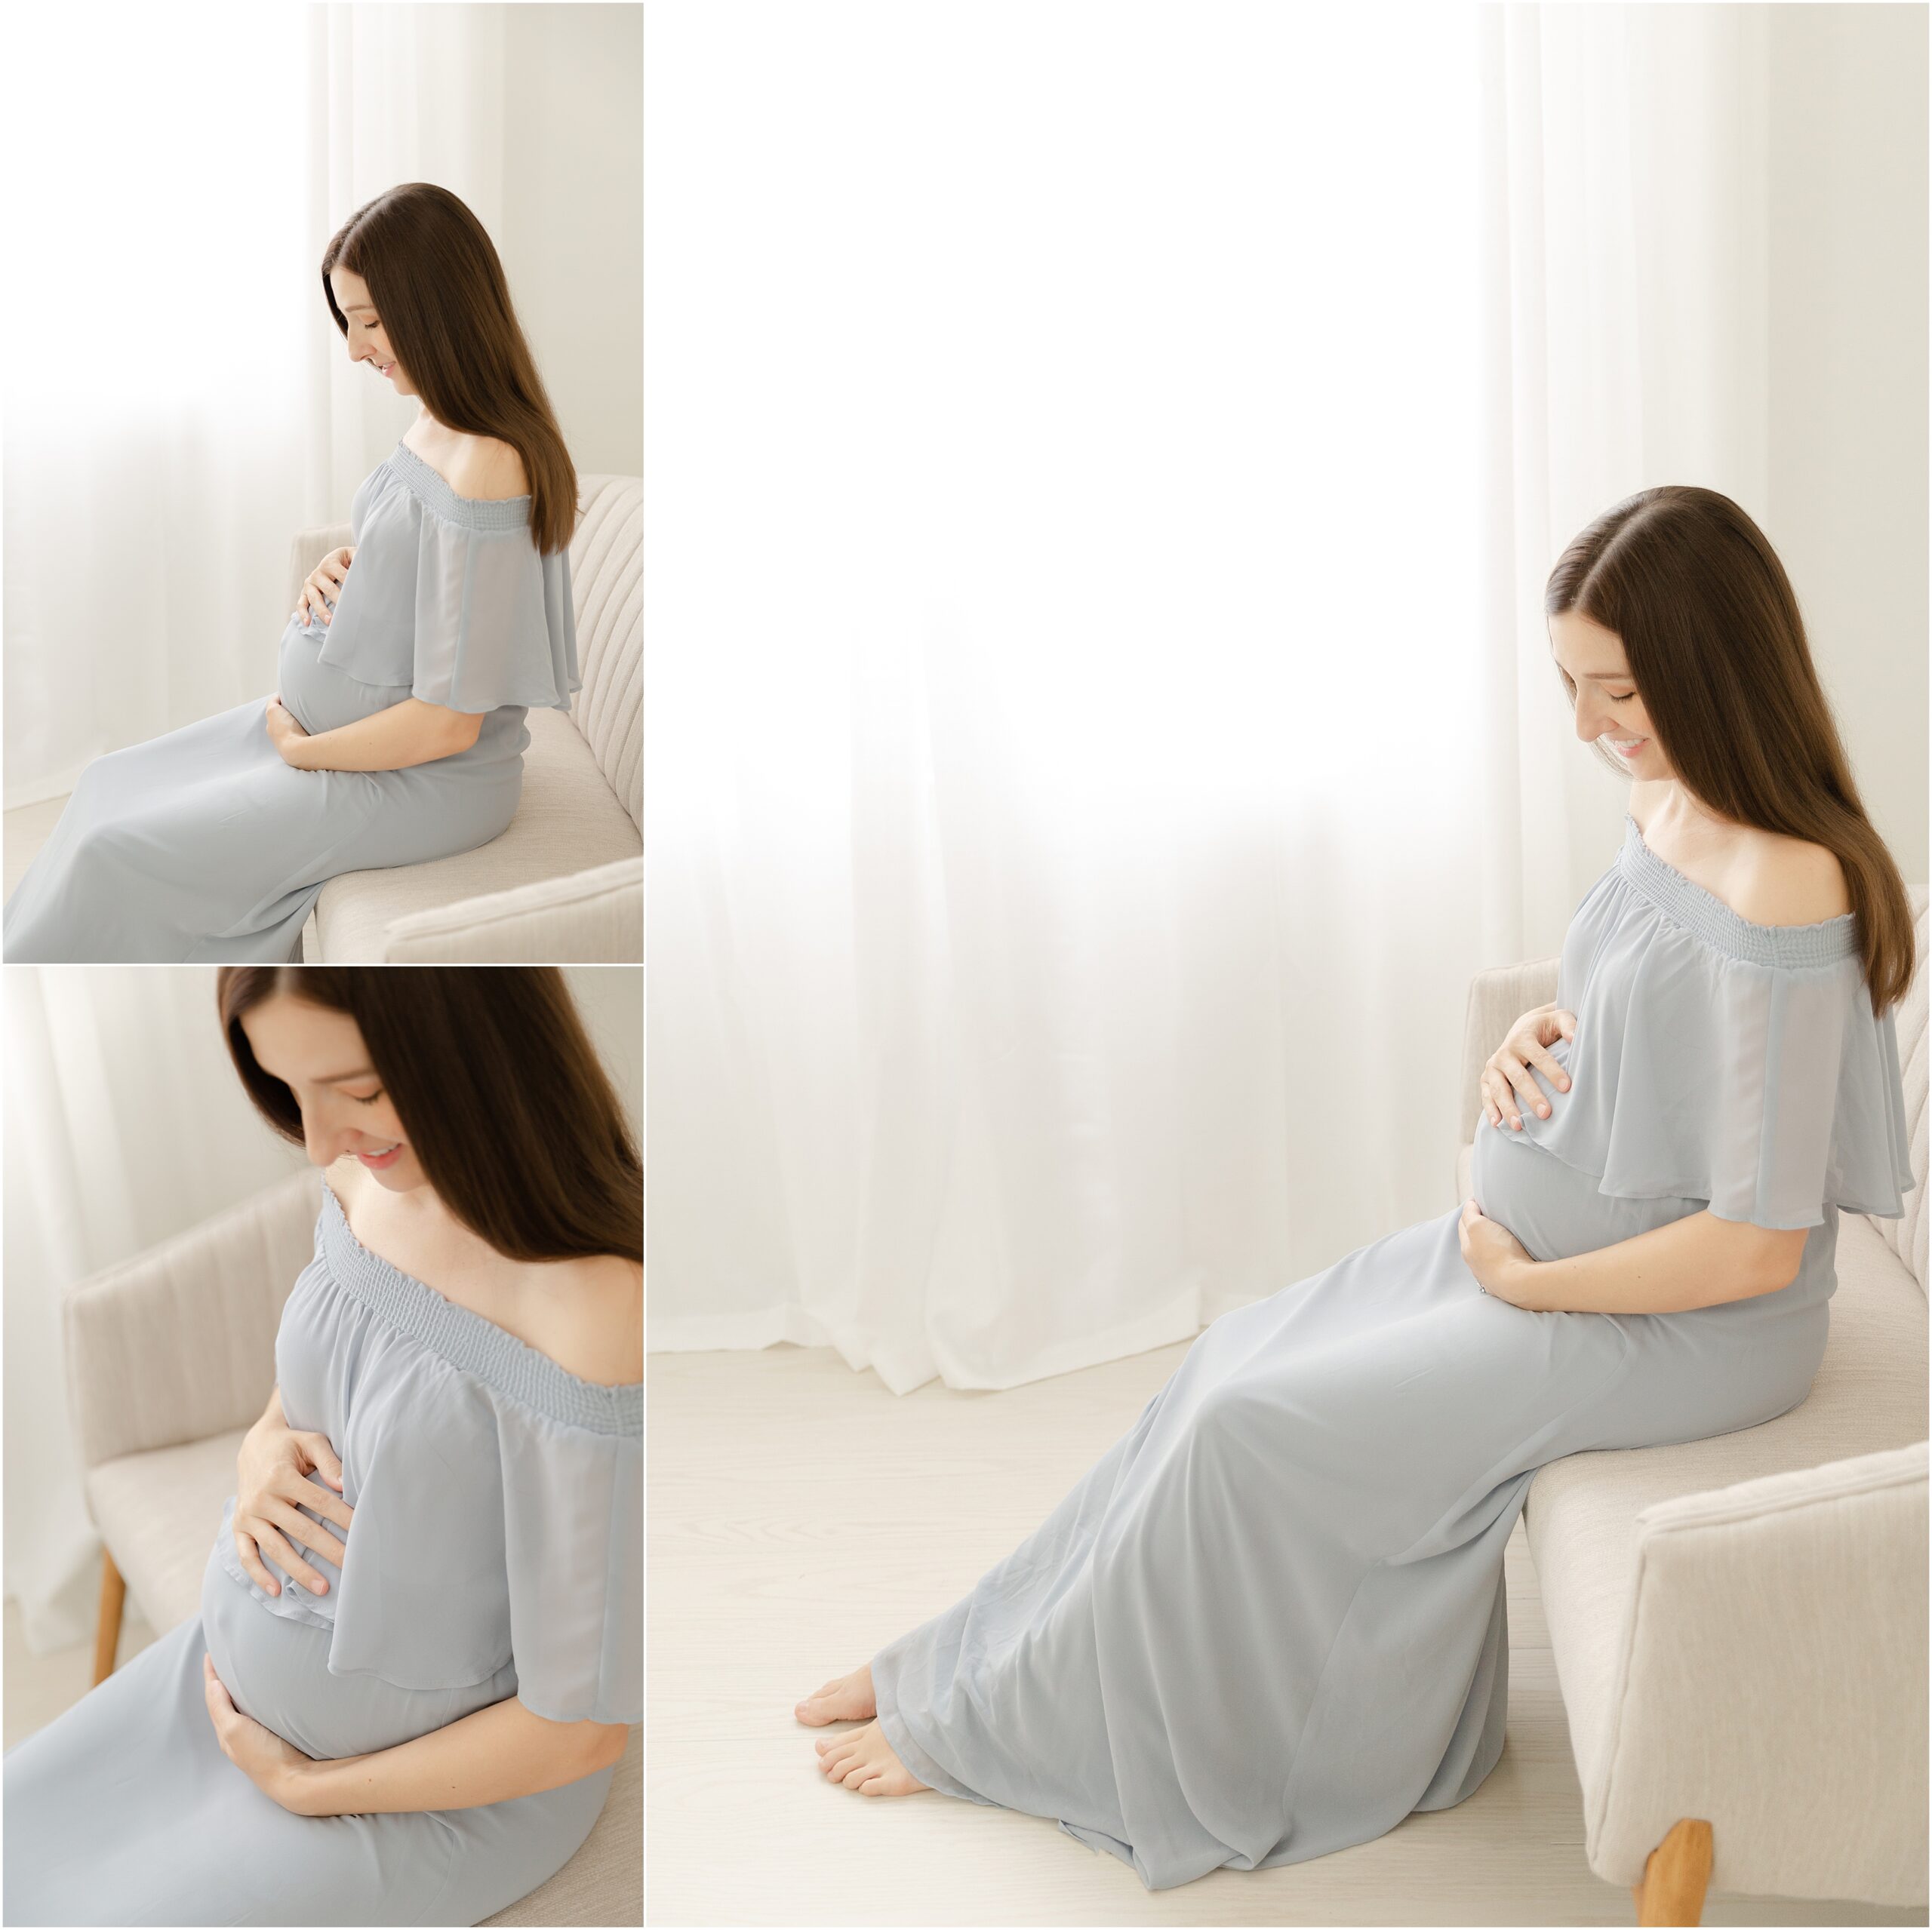 Pregnant woman with long dark hair and a light blue dress poses for maternity photos